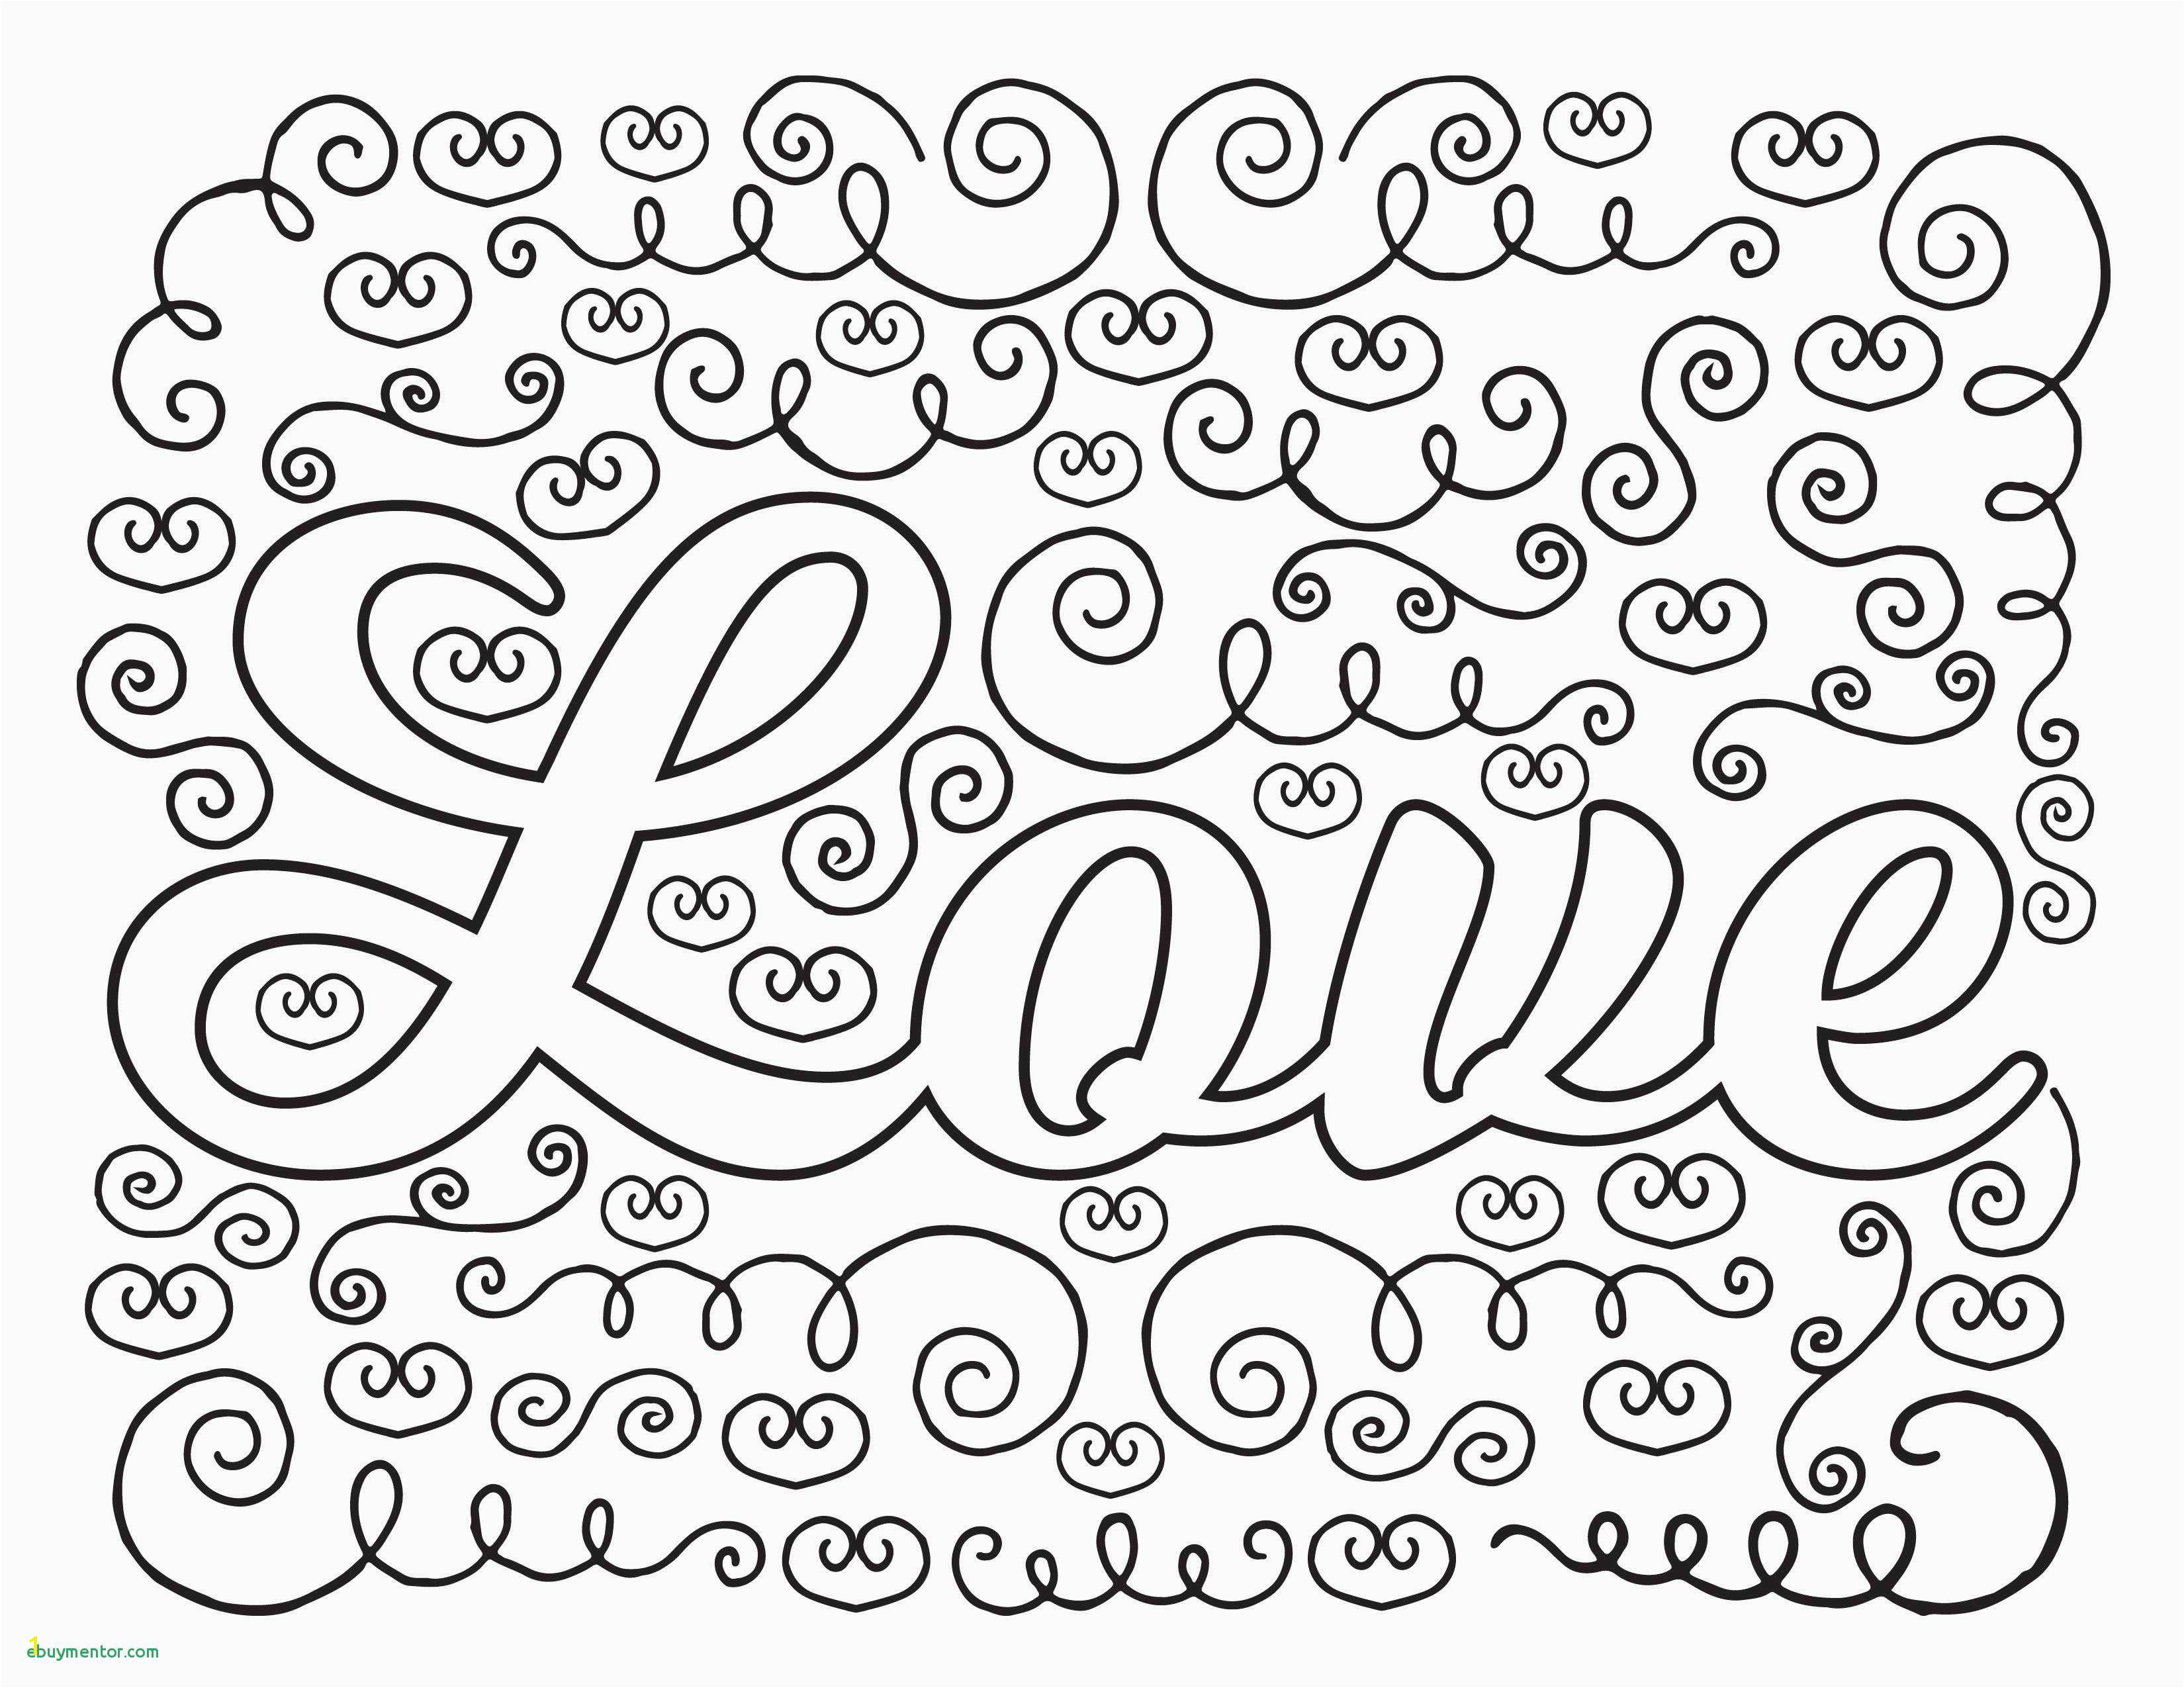 Free Coloring Pages Color by Number 29 Free Printable Numbers Coloring Pages Collection